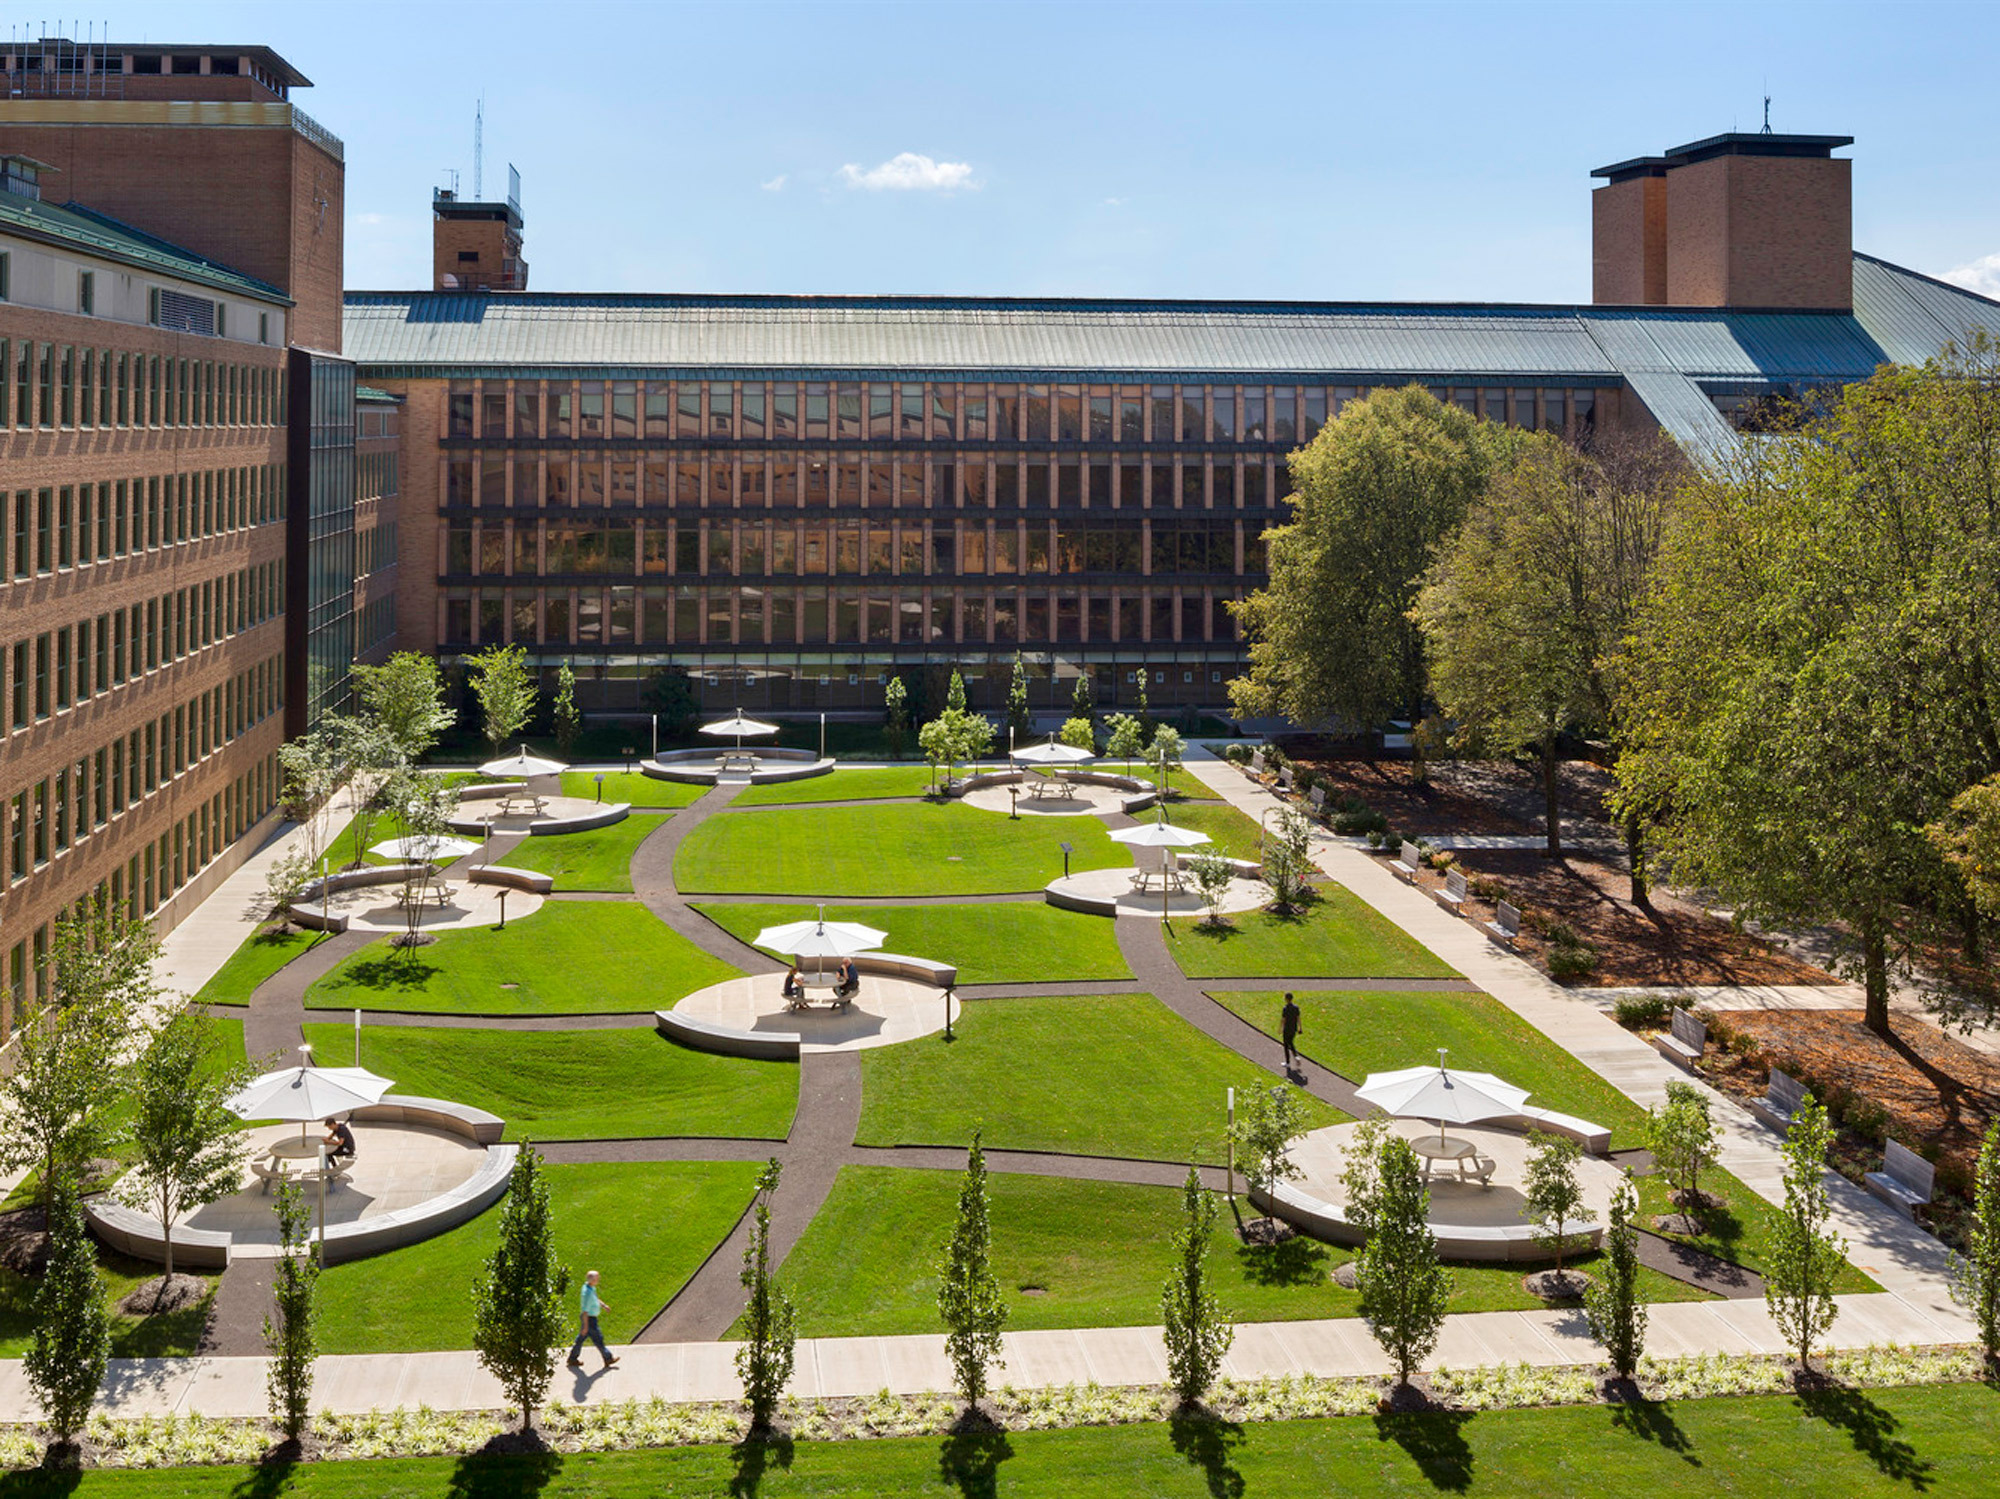 Lush green lawn with symmetrical garden beds and circular seating areas punctuates the courtyard, surrounded by a cohesive blend of modern and traditional brick architecture under a clear blue sky.